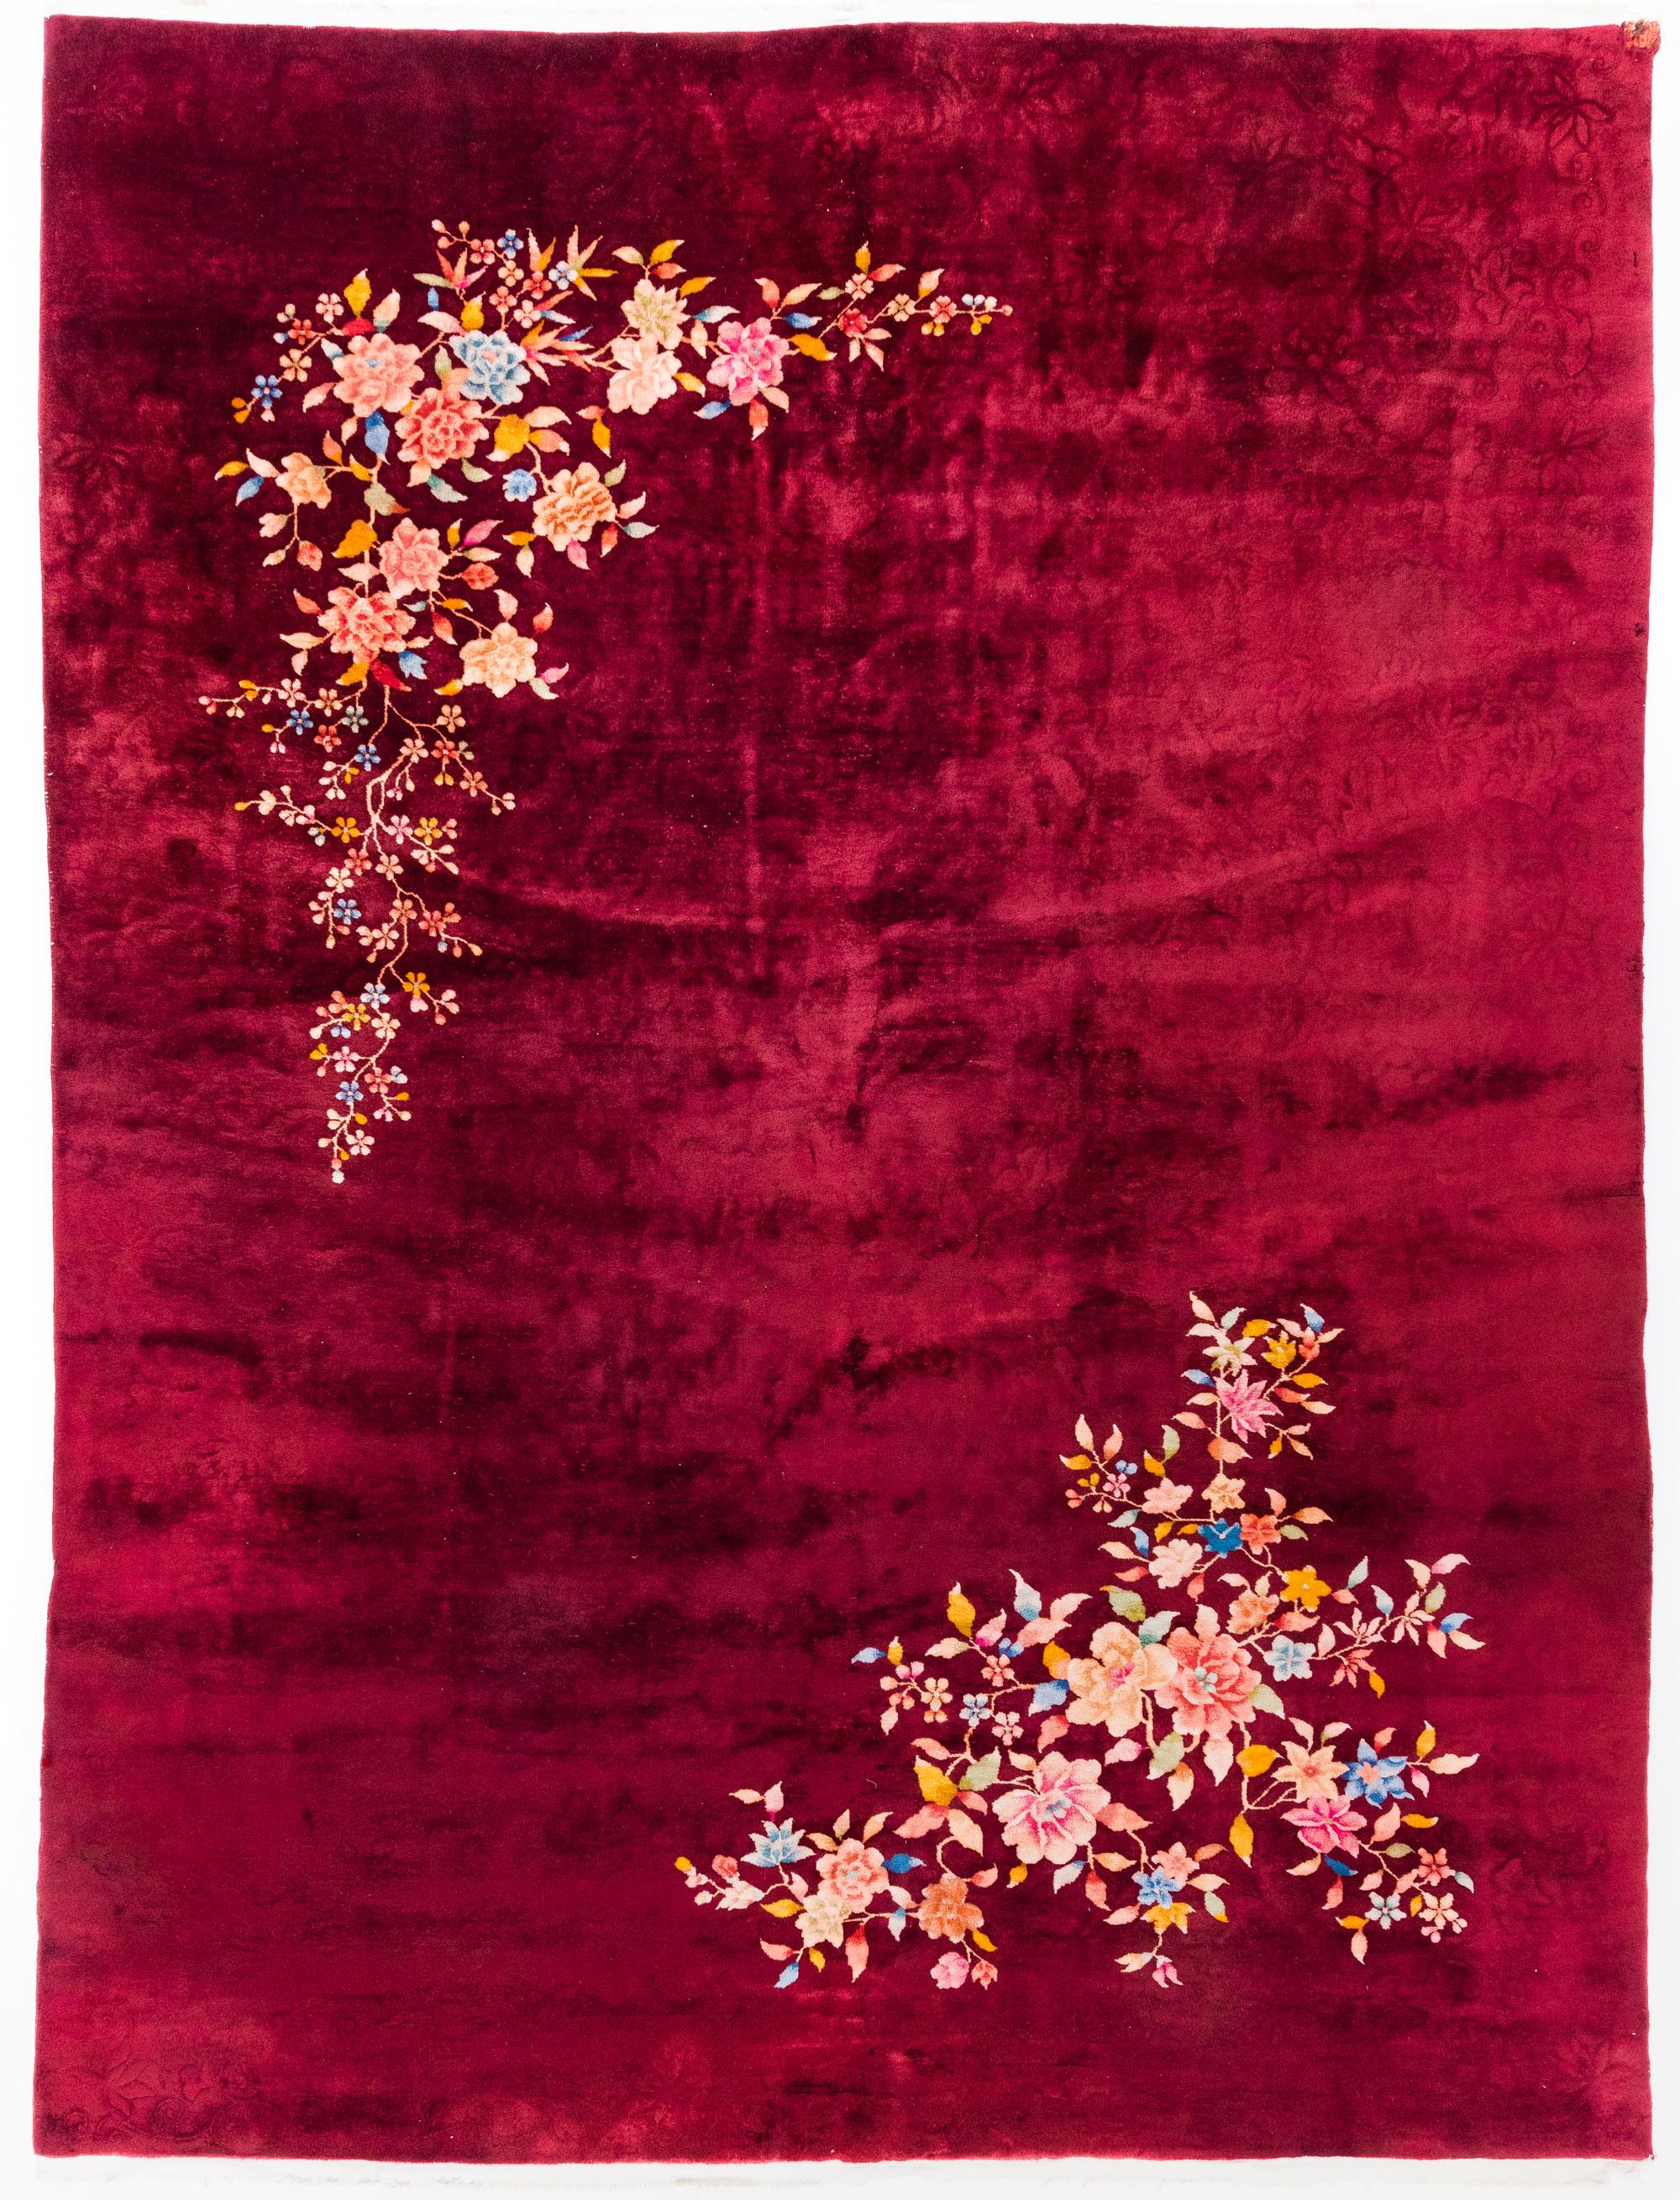 20th Century Art Deco Nichols Chinese Rug in Burgundy with Floral Accents in Jewel Tones For Sale